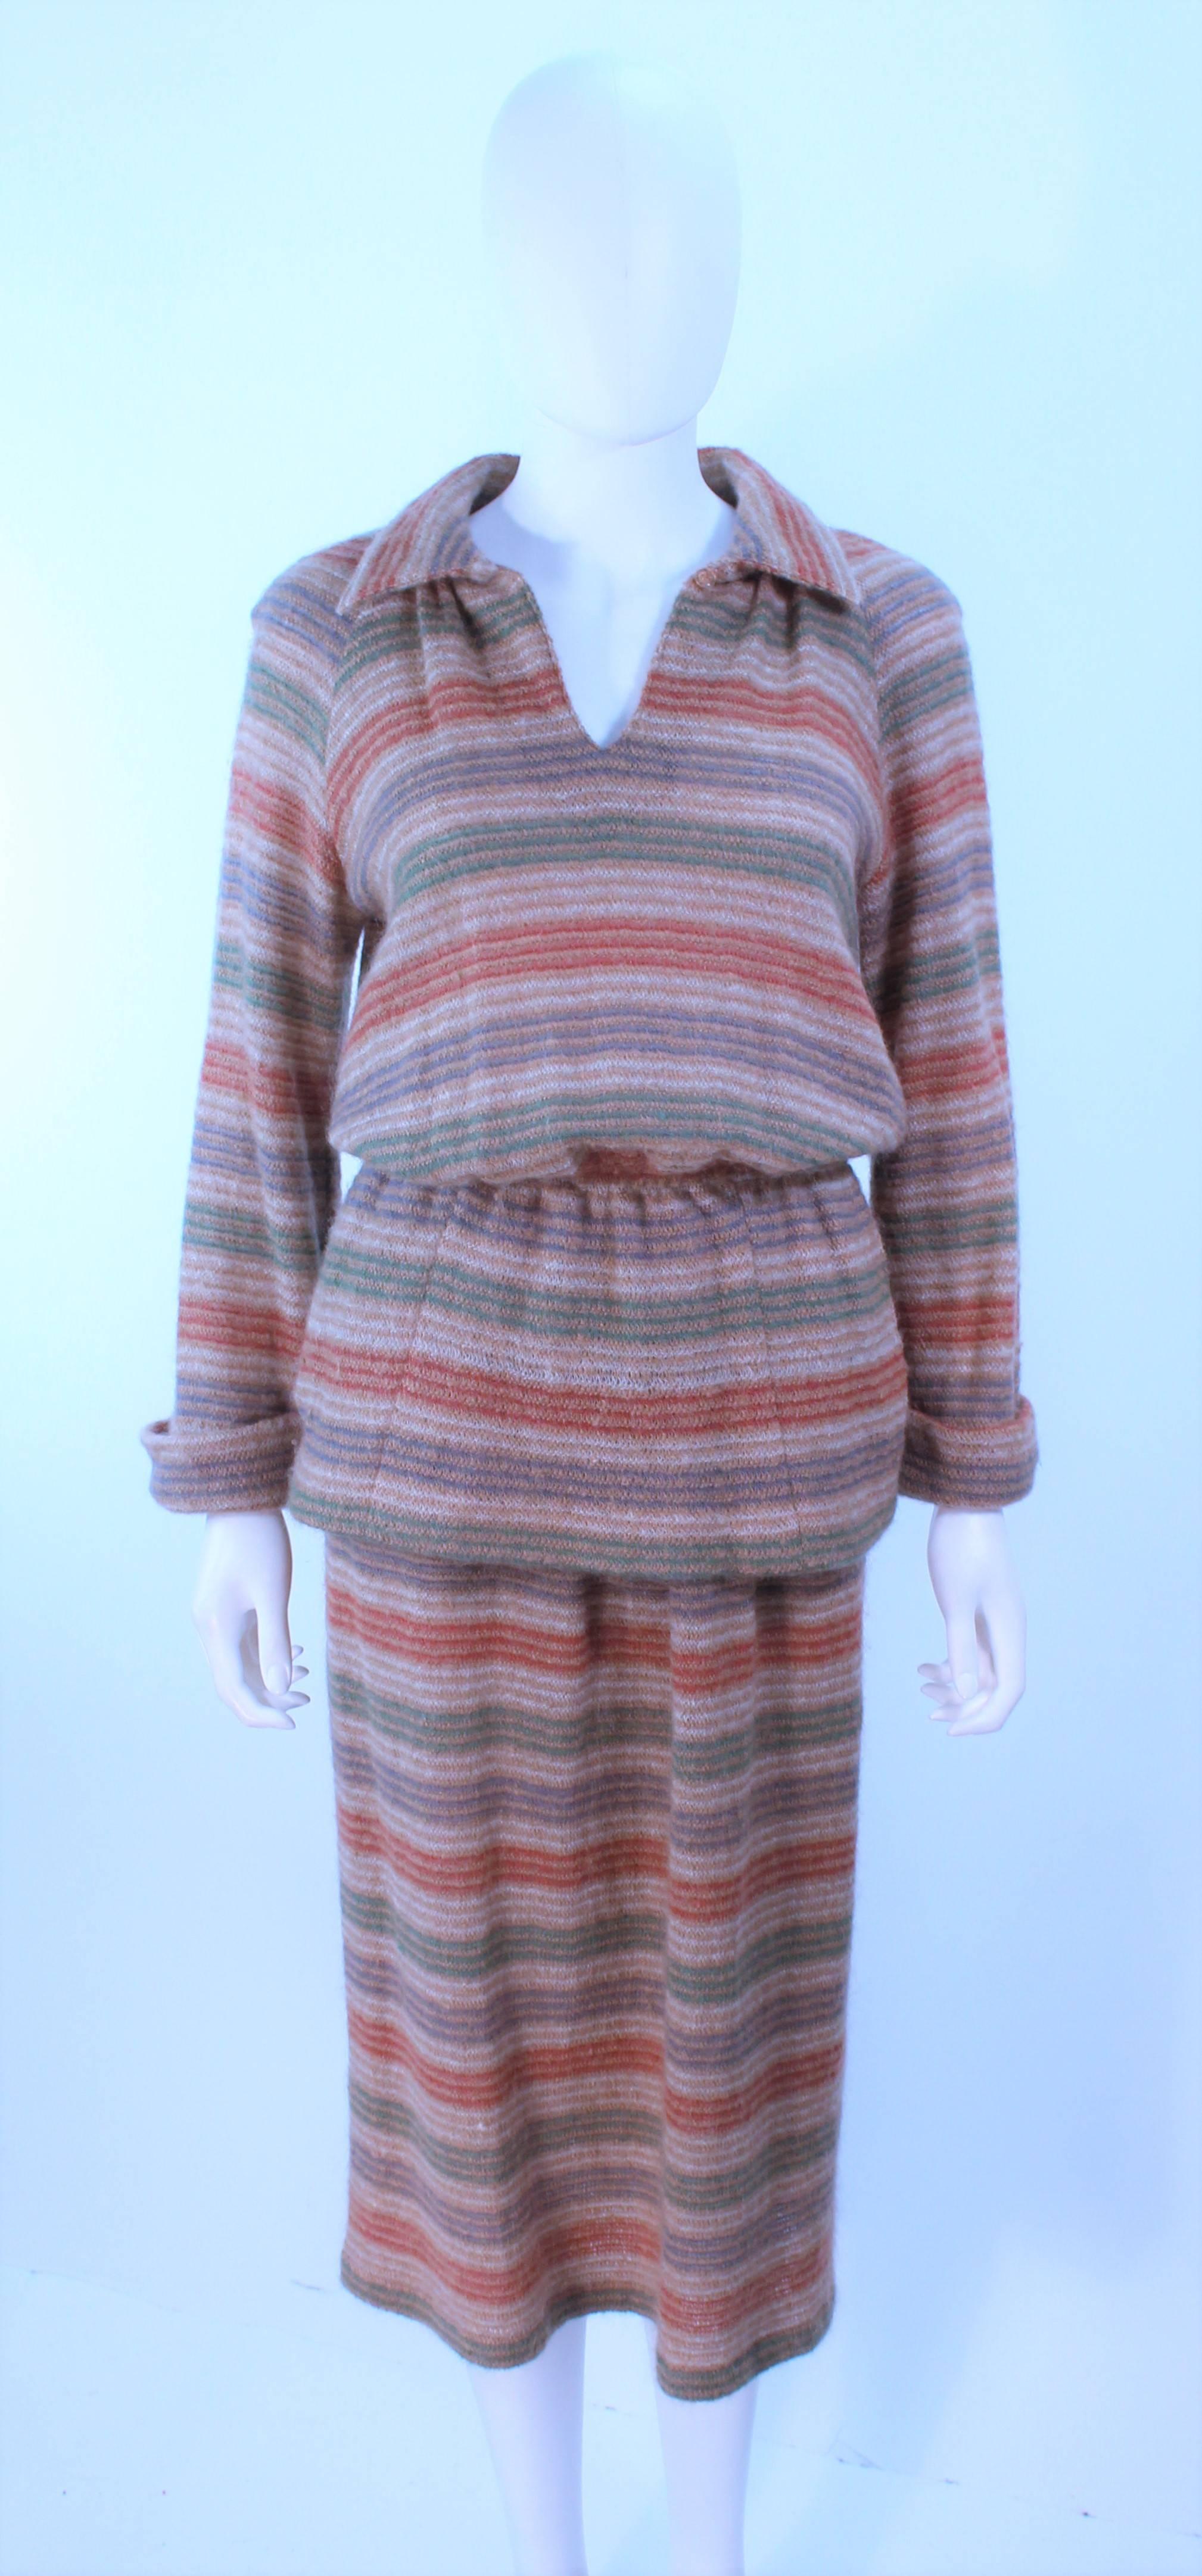 This Missoni design is composed of a khaki hue wool with a stripe design. The top is a tunic style with a center button at the neck. The skirt has side pockets with an elastic waist. In excellent vintage condition.

**Please cross-reference